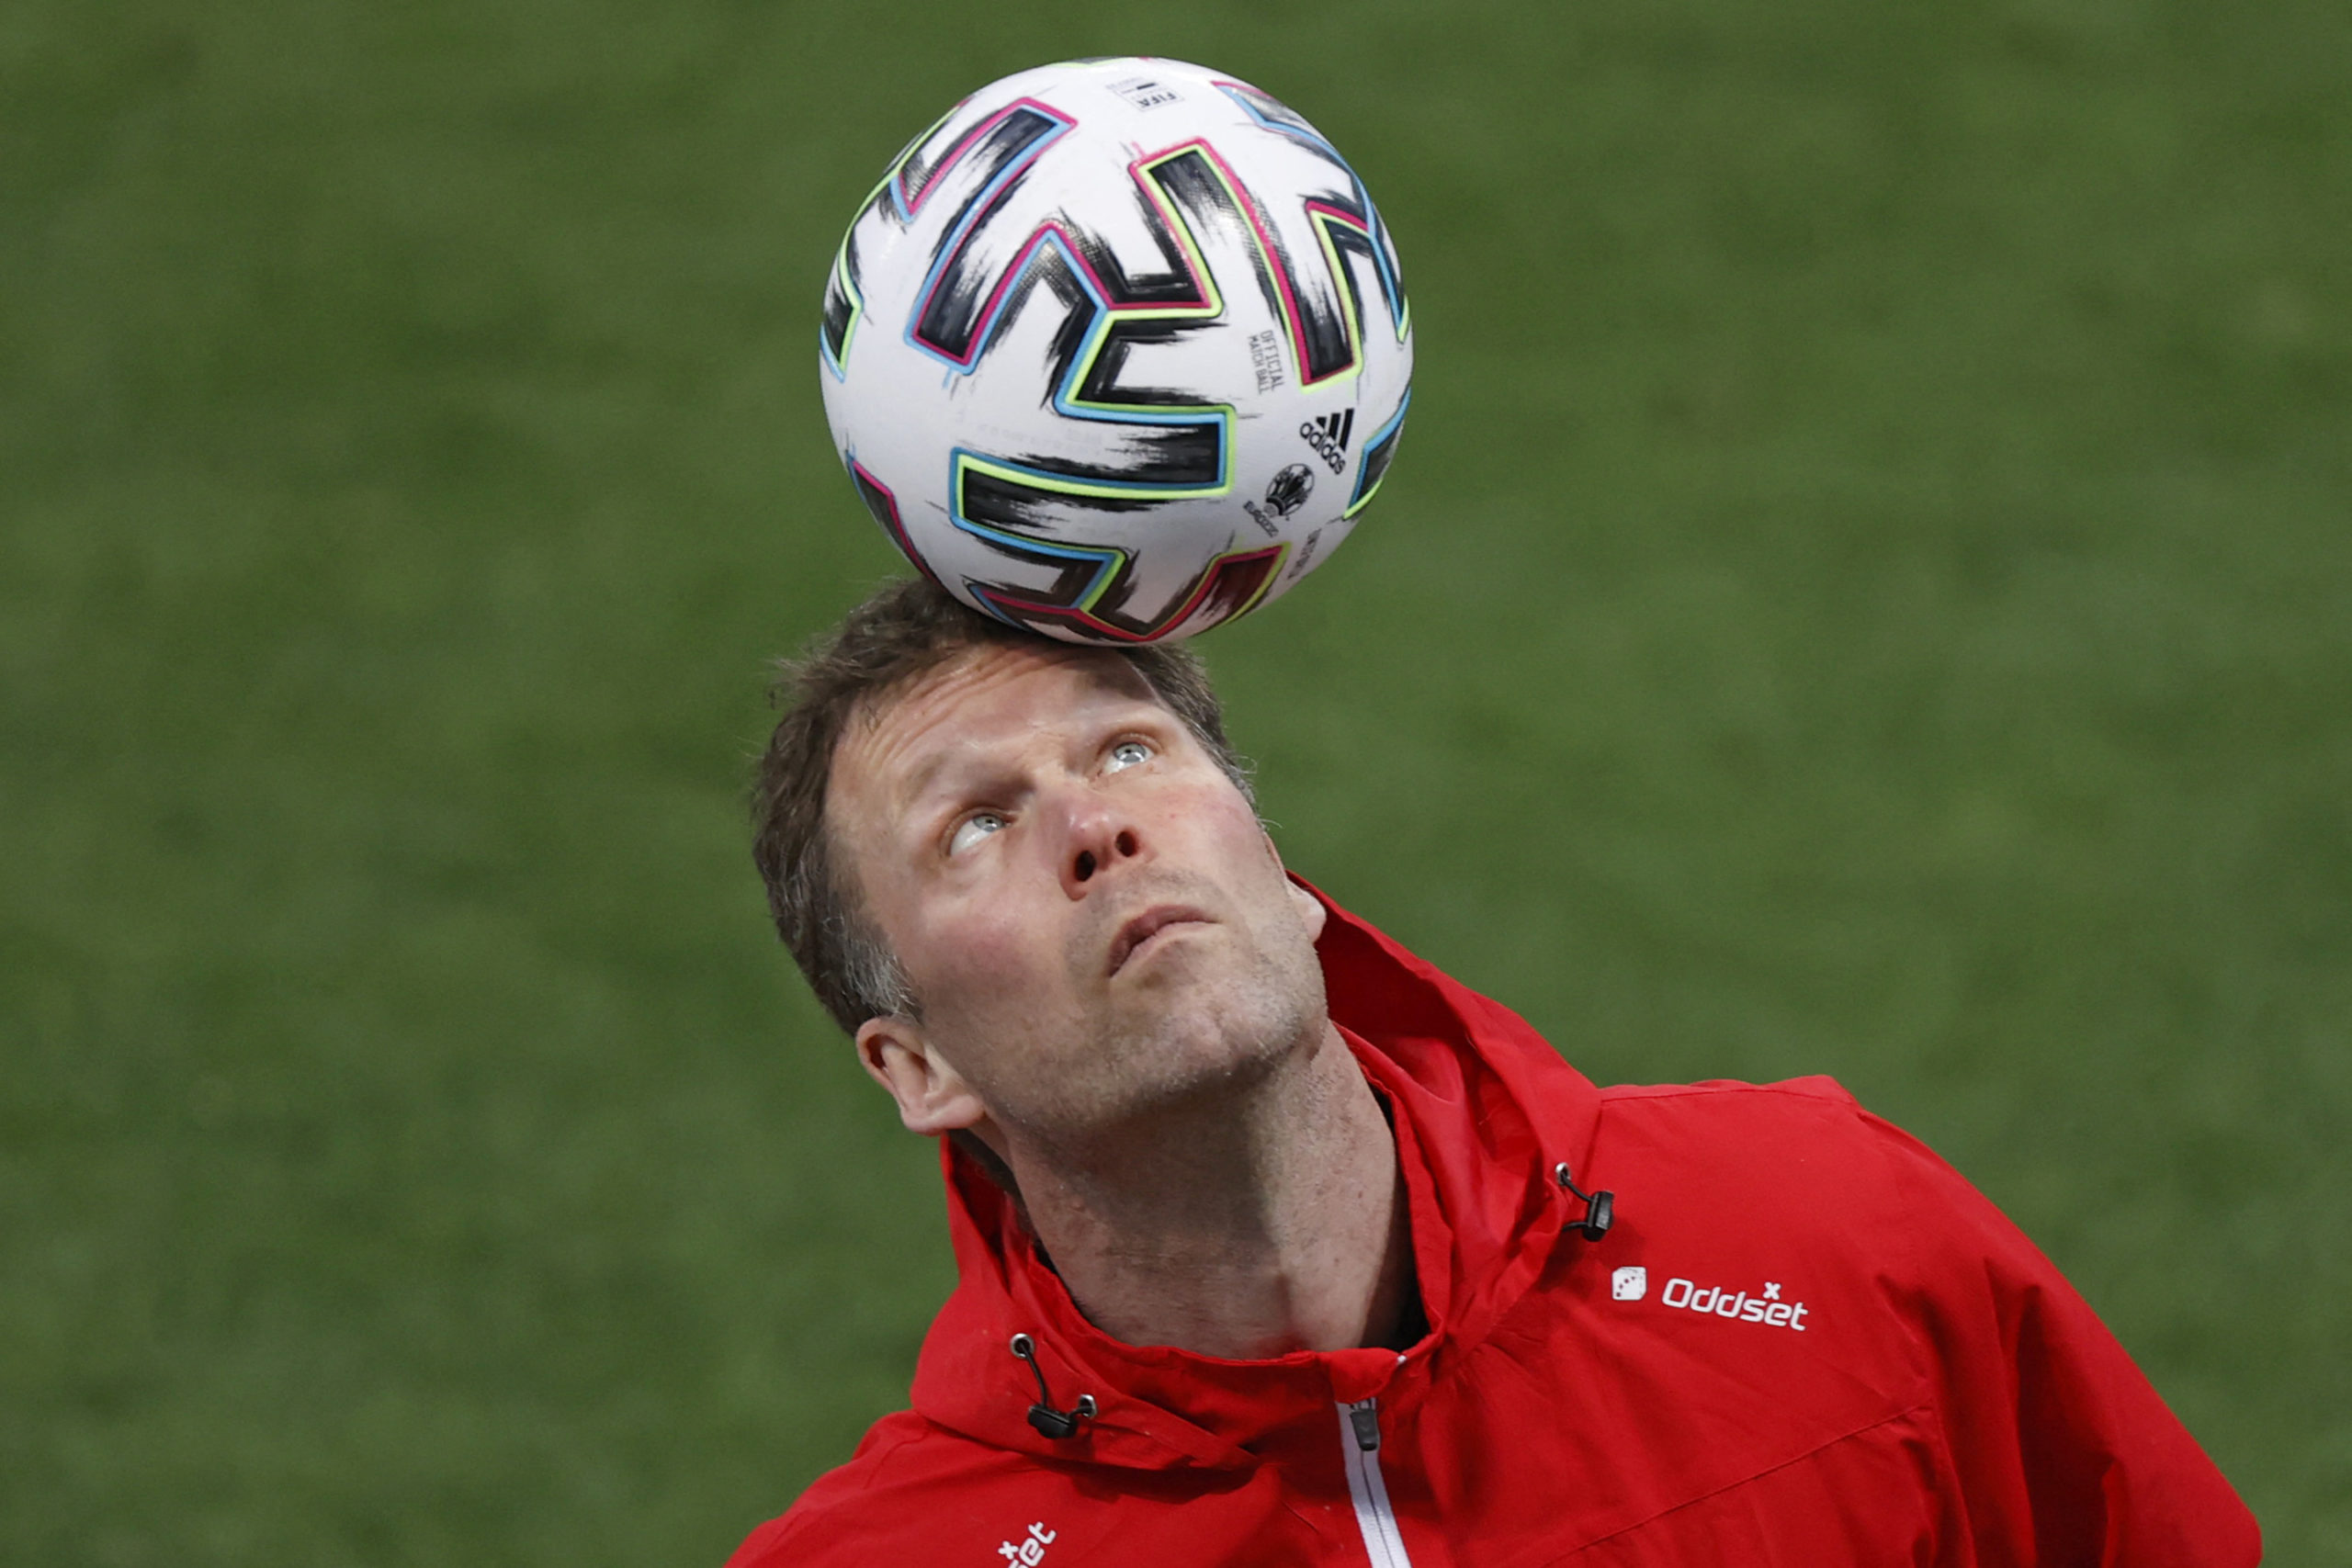 Supporters delight in seeing former Celtic man Morten Wieghorst at Euros; tip him for role